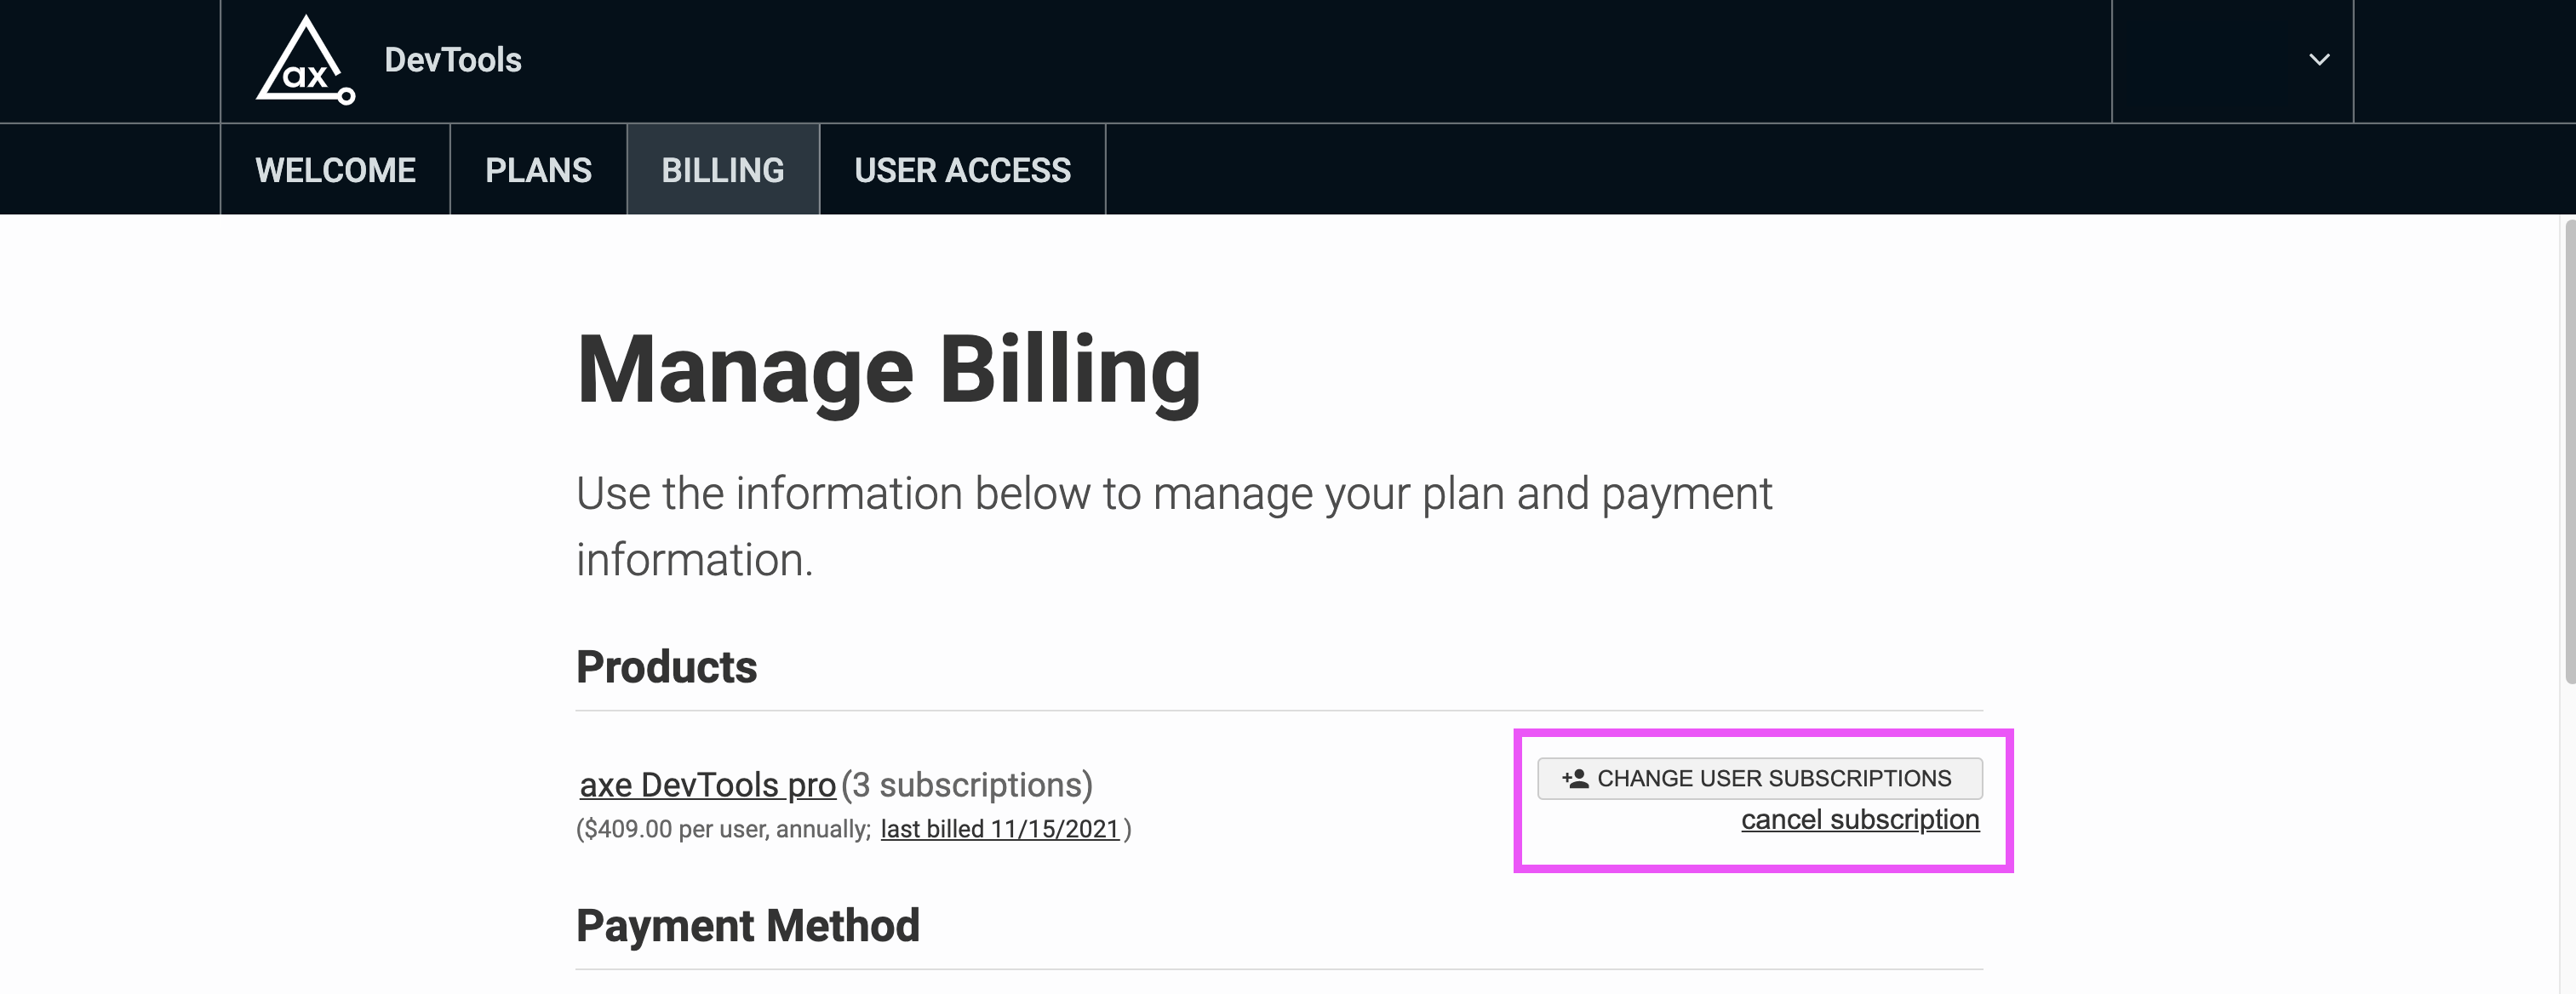 Screenshot of axe.deque.com showing new option to Change User Subscriptions online when you're on the 'Billing' tab.